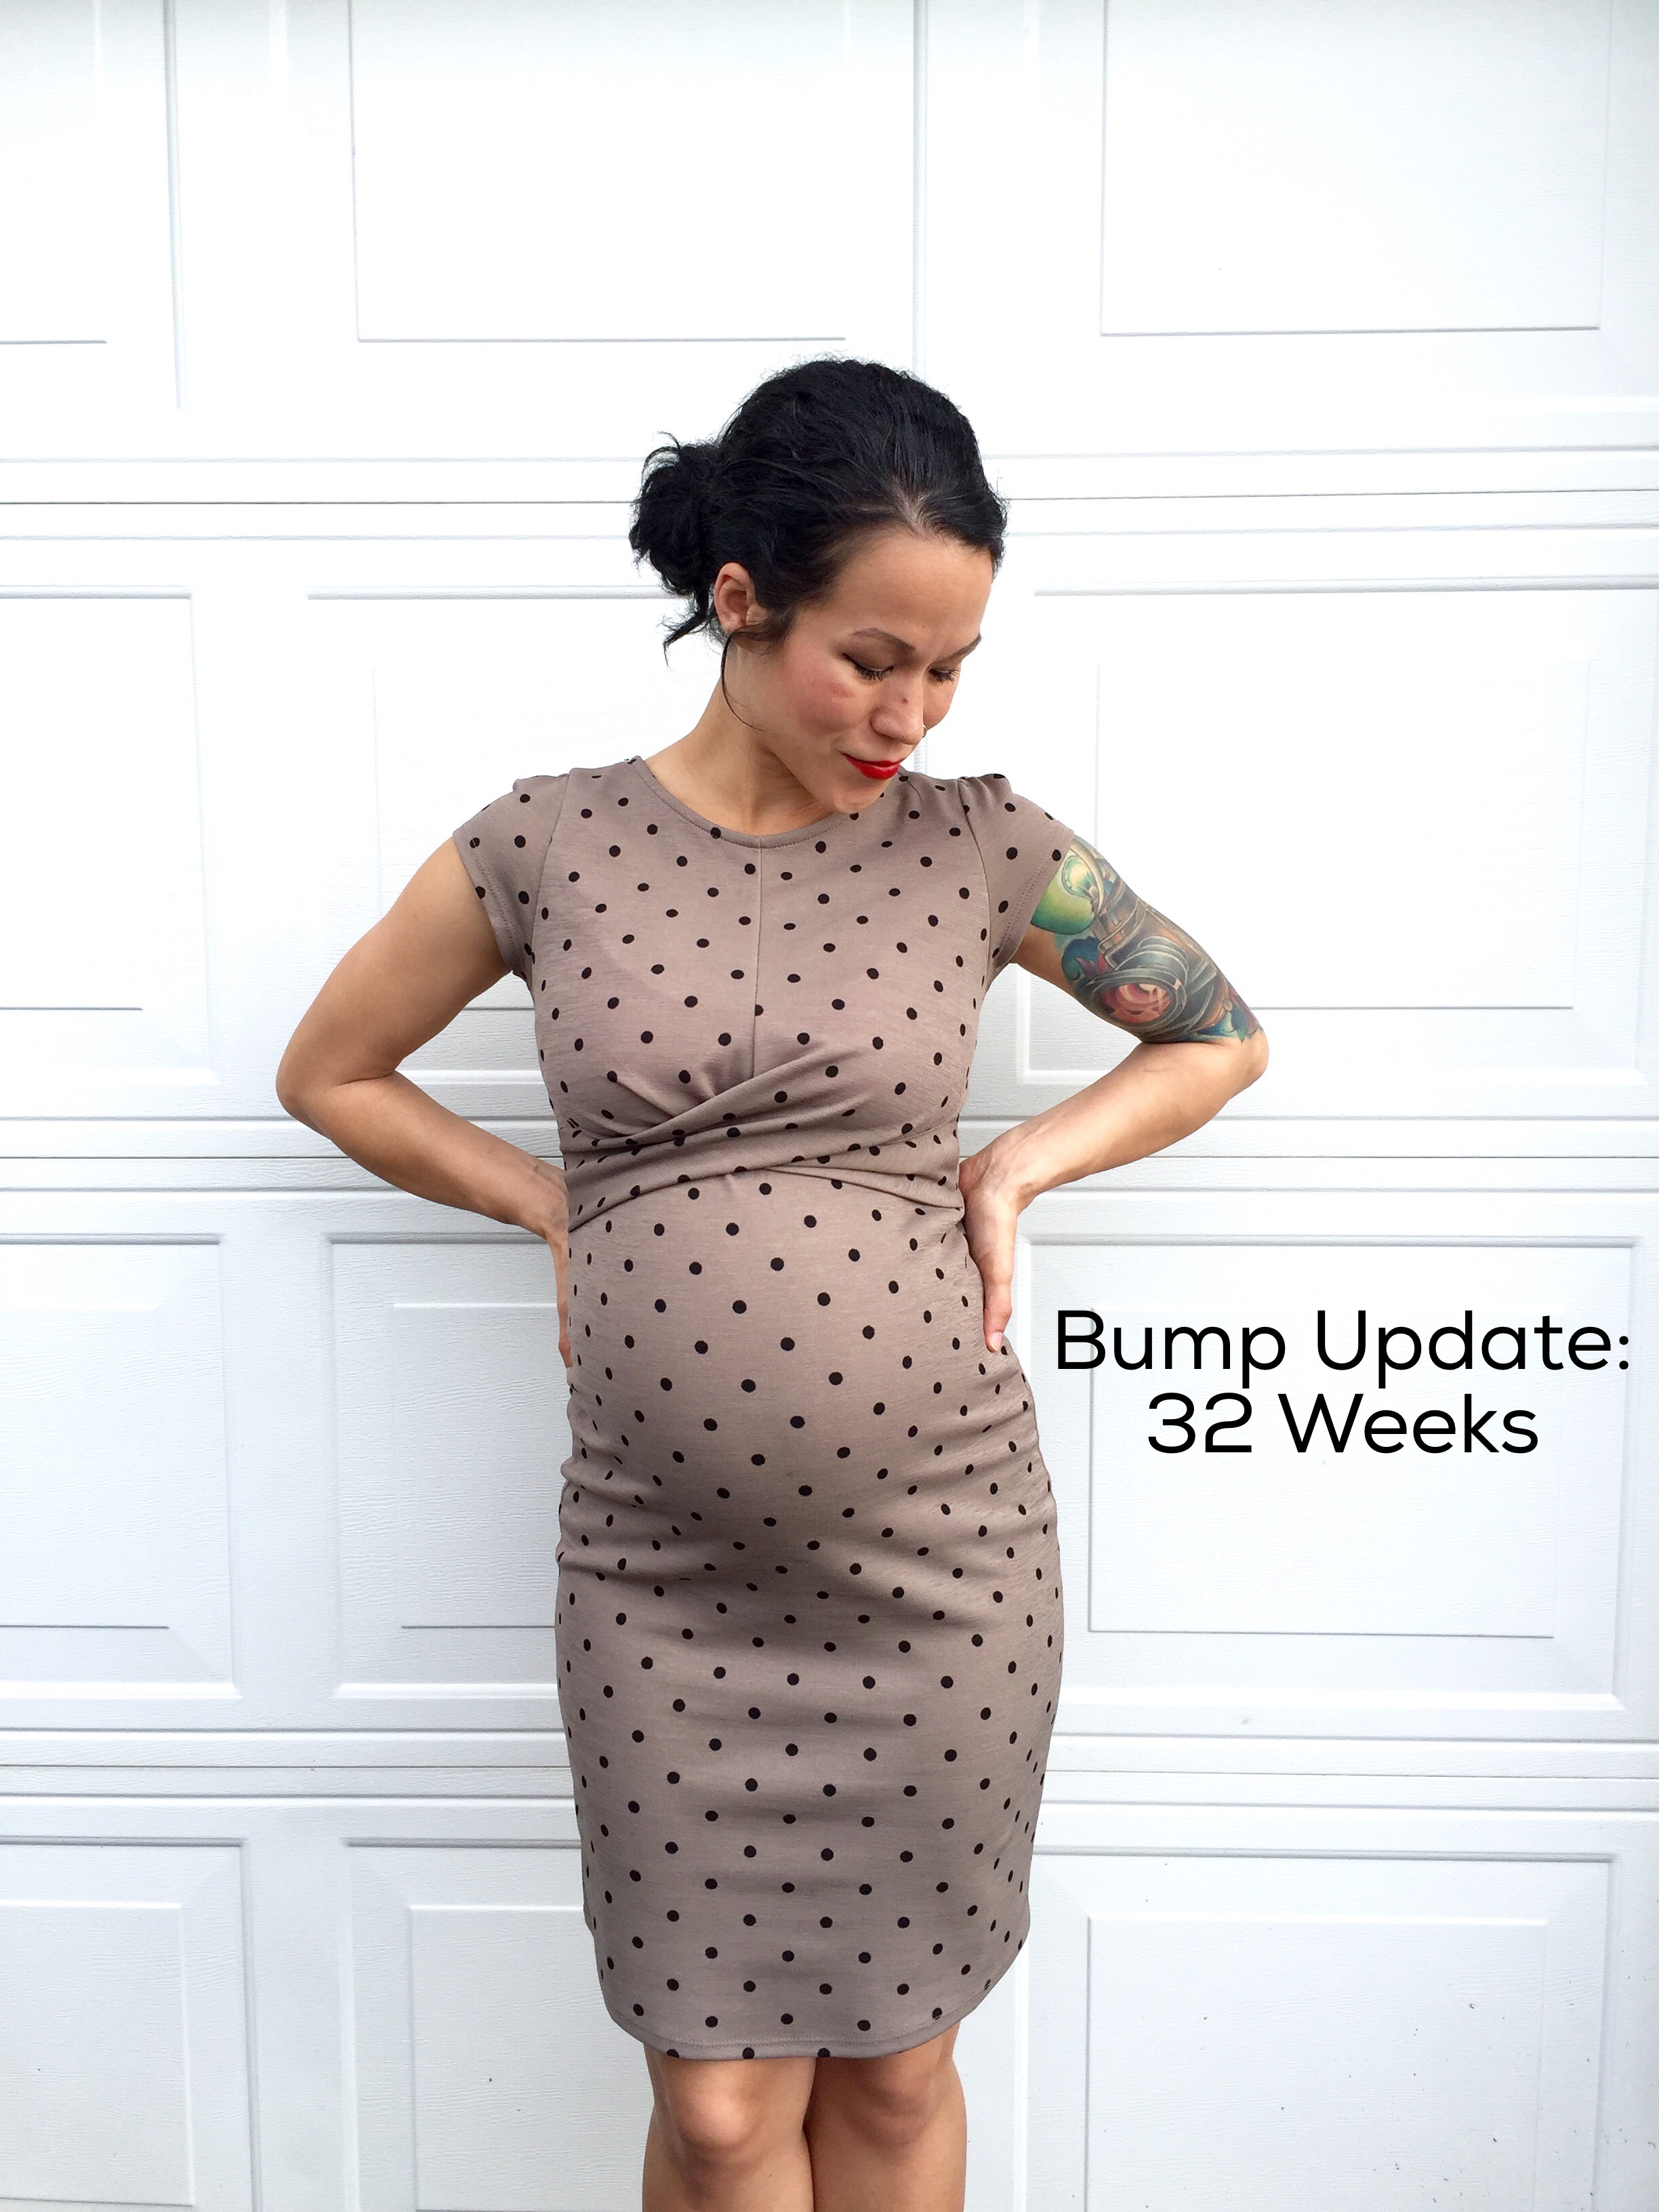 Pregnancy 32 Weeks Bump Update Diary Of A Fit Mommy